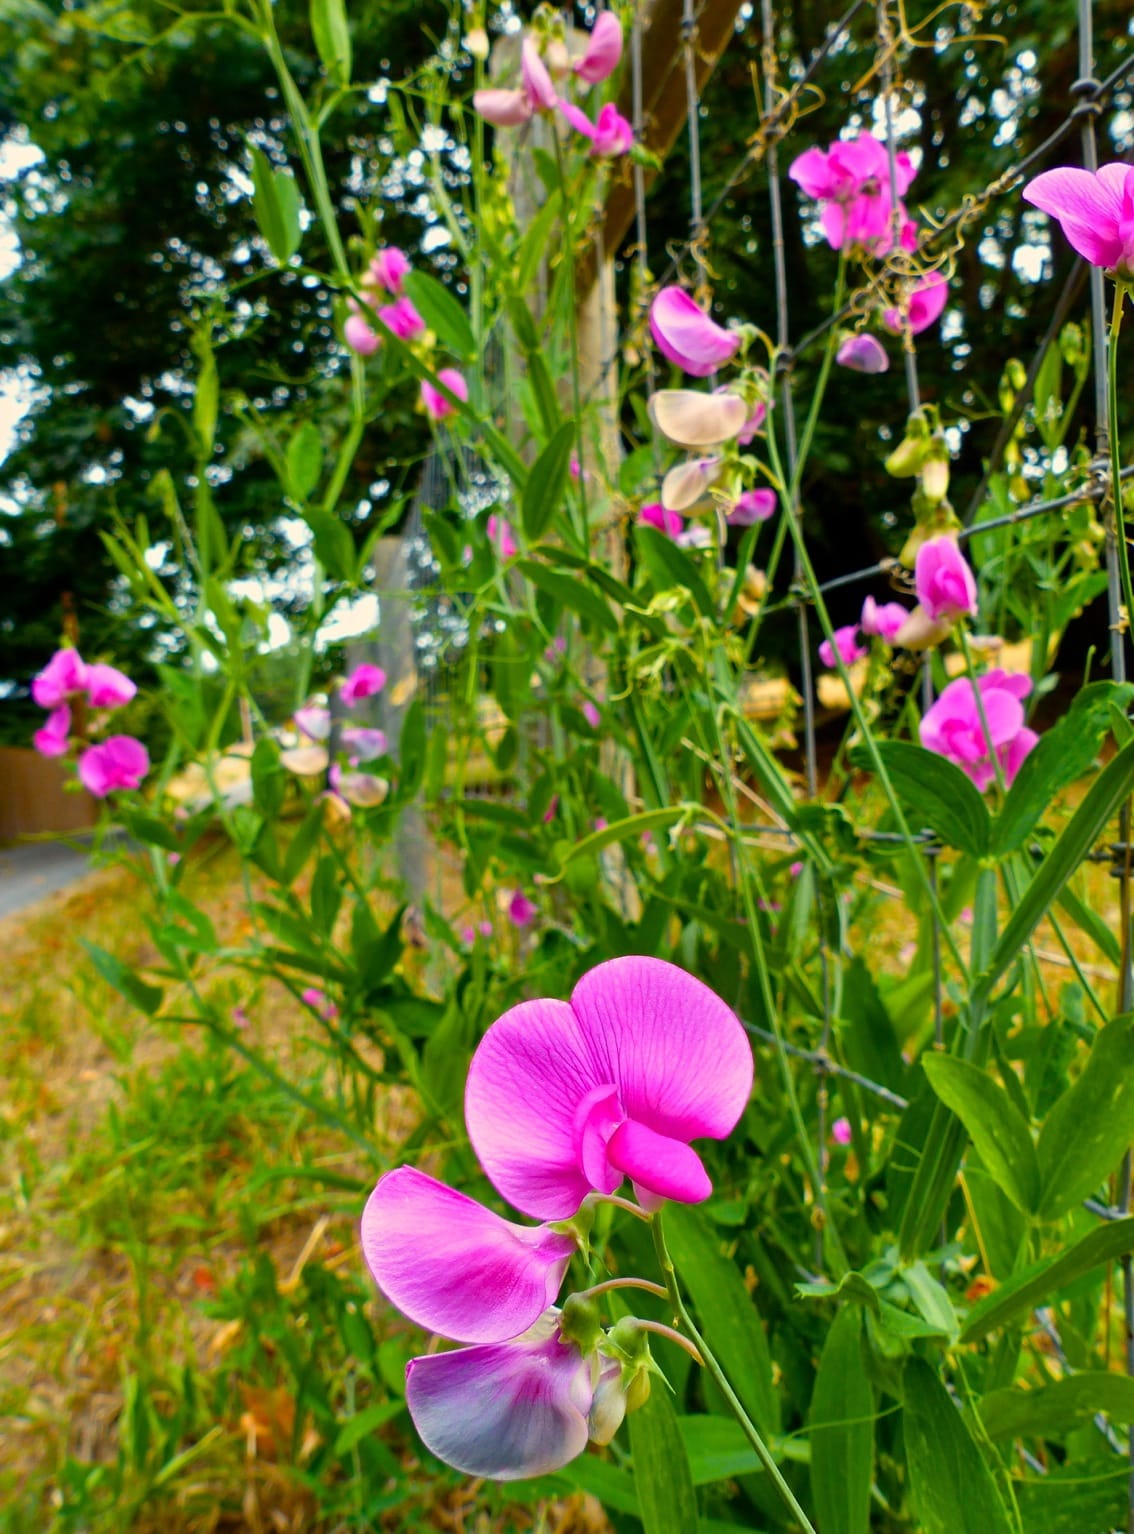 It doesn't take massive flower beds to make beneficial insects happy — just a few pollen and nectar-rich plants such as these sweet peas, growing on a fence line near Langley. Convert small areas normally given over to pampered lawns or cultivated crops into pollinator pockets. Idled corners of farm fields work well, too.